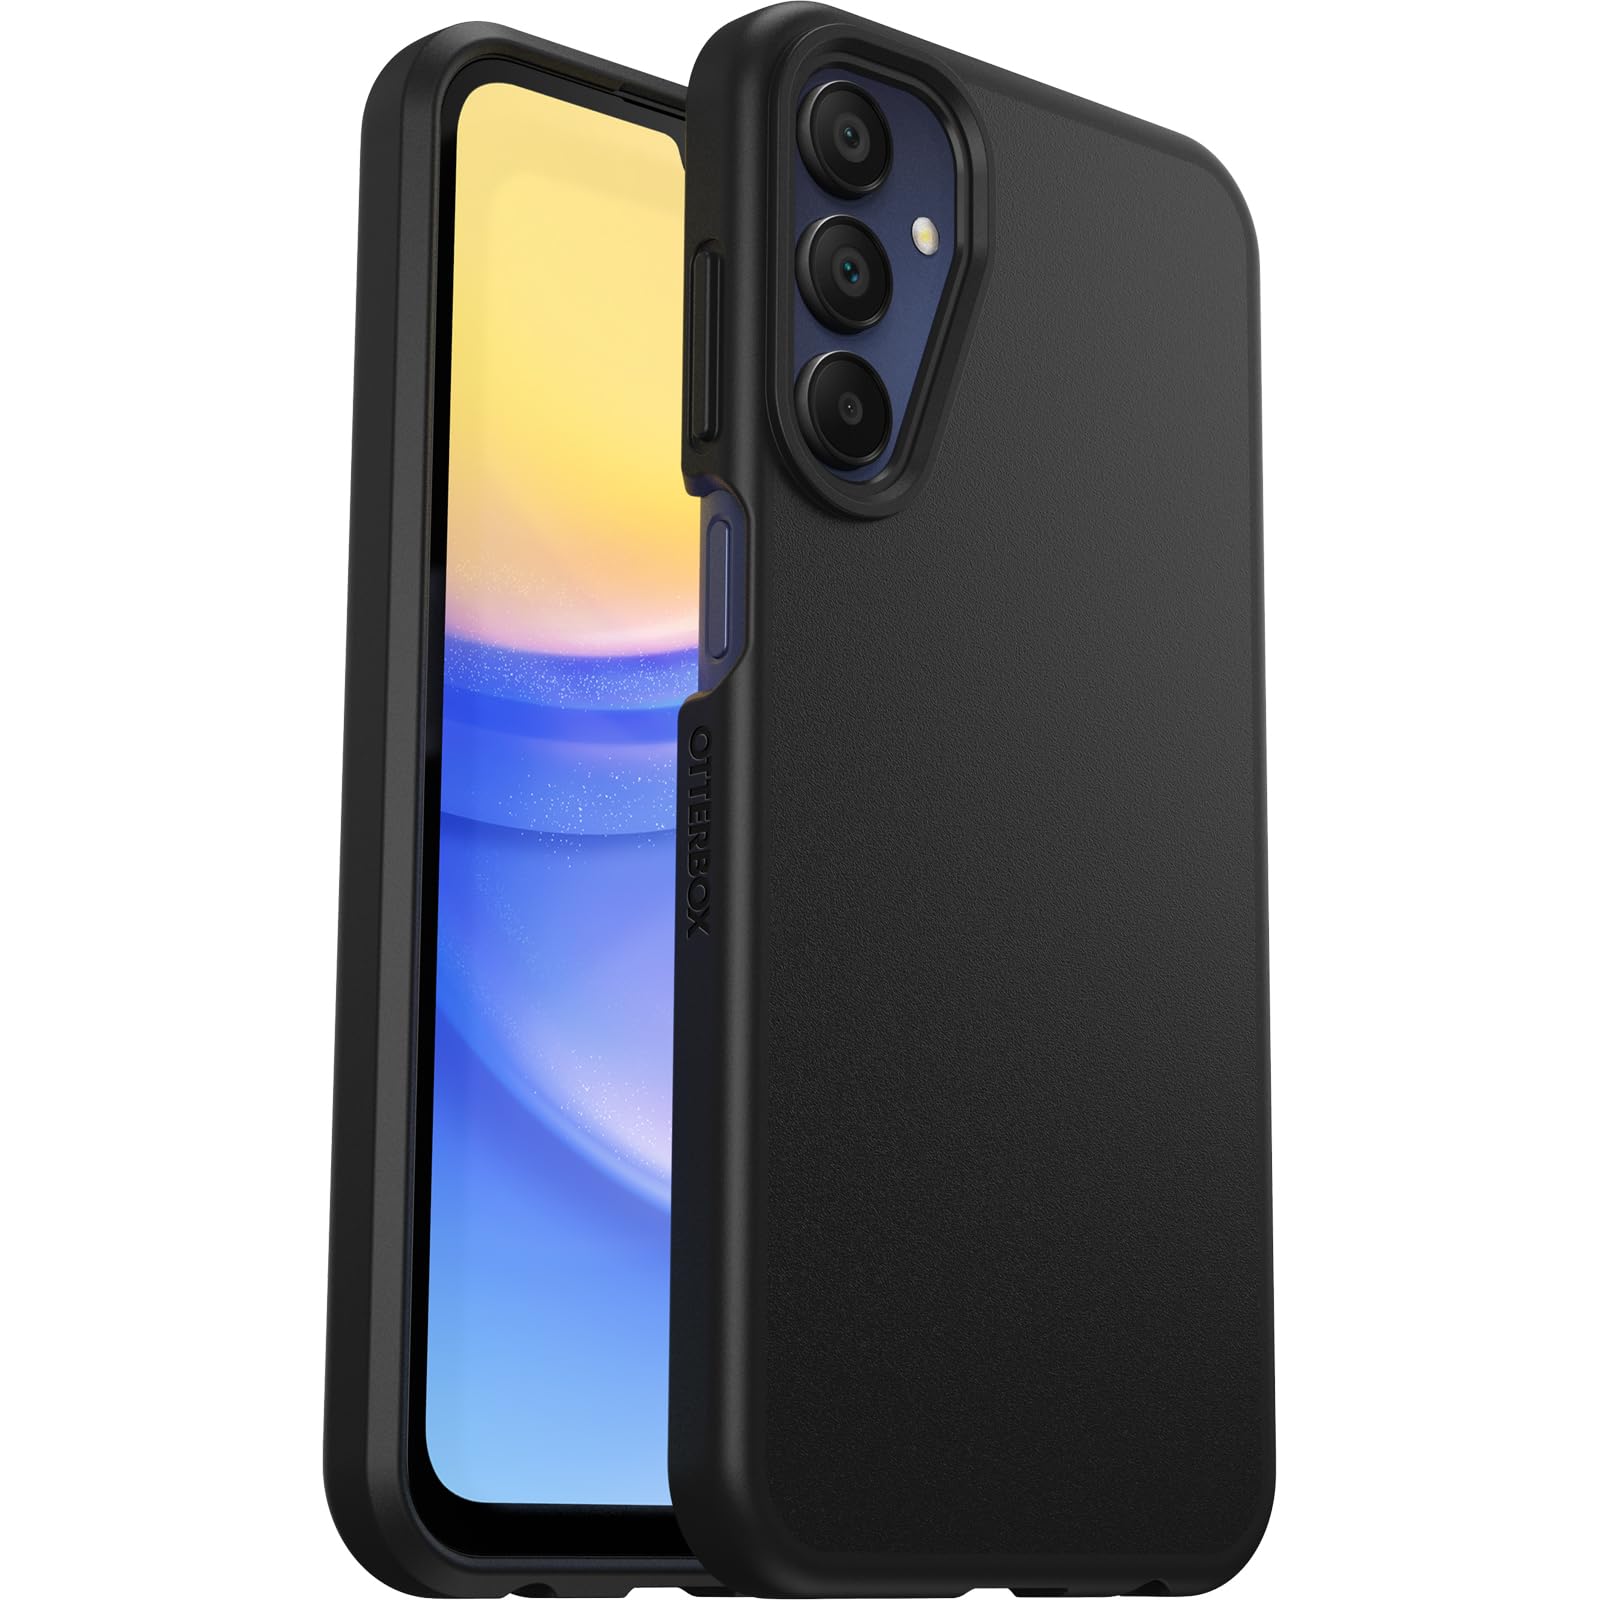 OtterBox Samsung Galaxy A15 5G Prefix Series Case - Black, Ultra-Thin, Pocket-Friendly, Raised Edges Protect Camera & Screen, Wireless Charging Compatible (Single Unit Ships in Polybag)